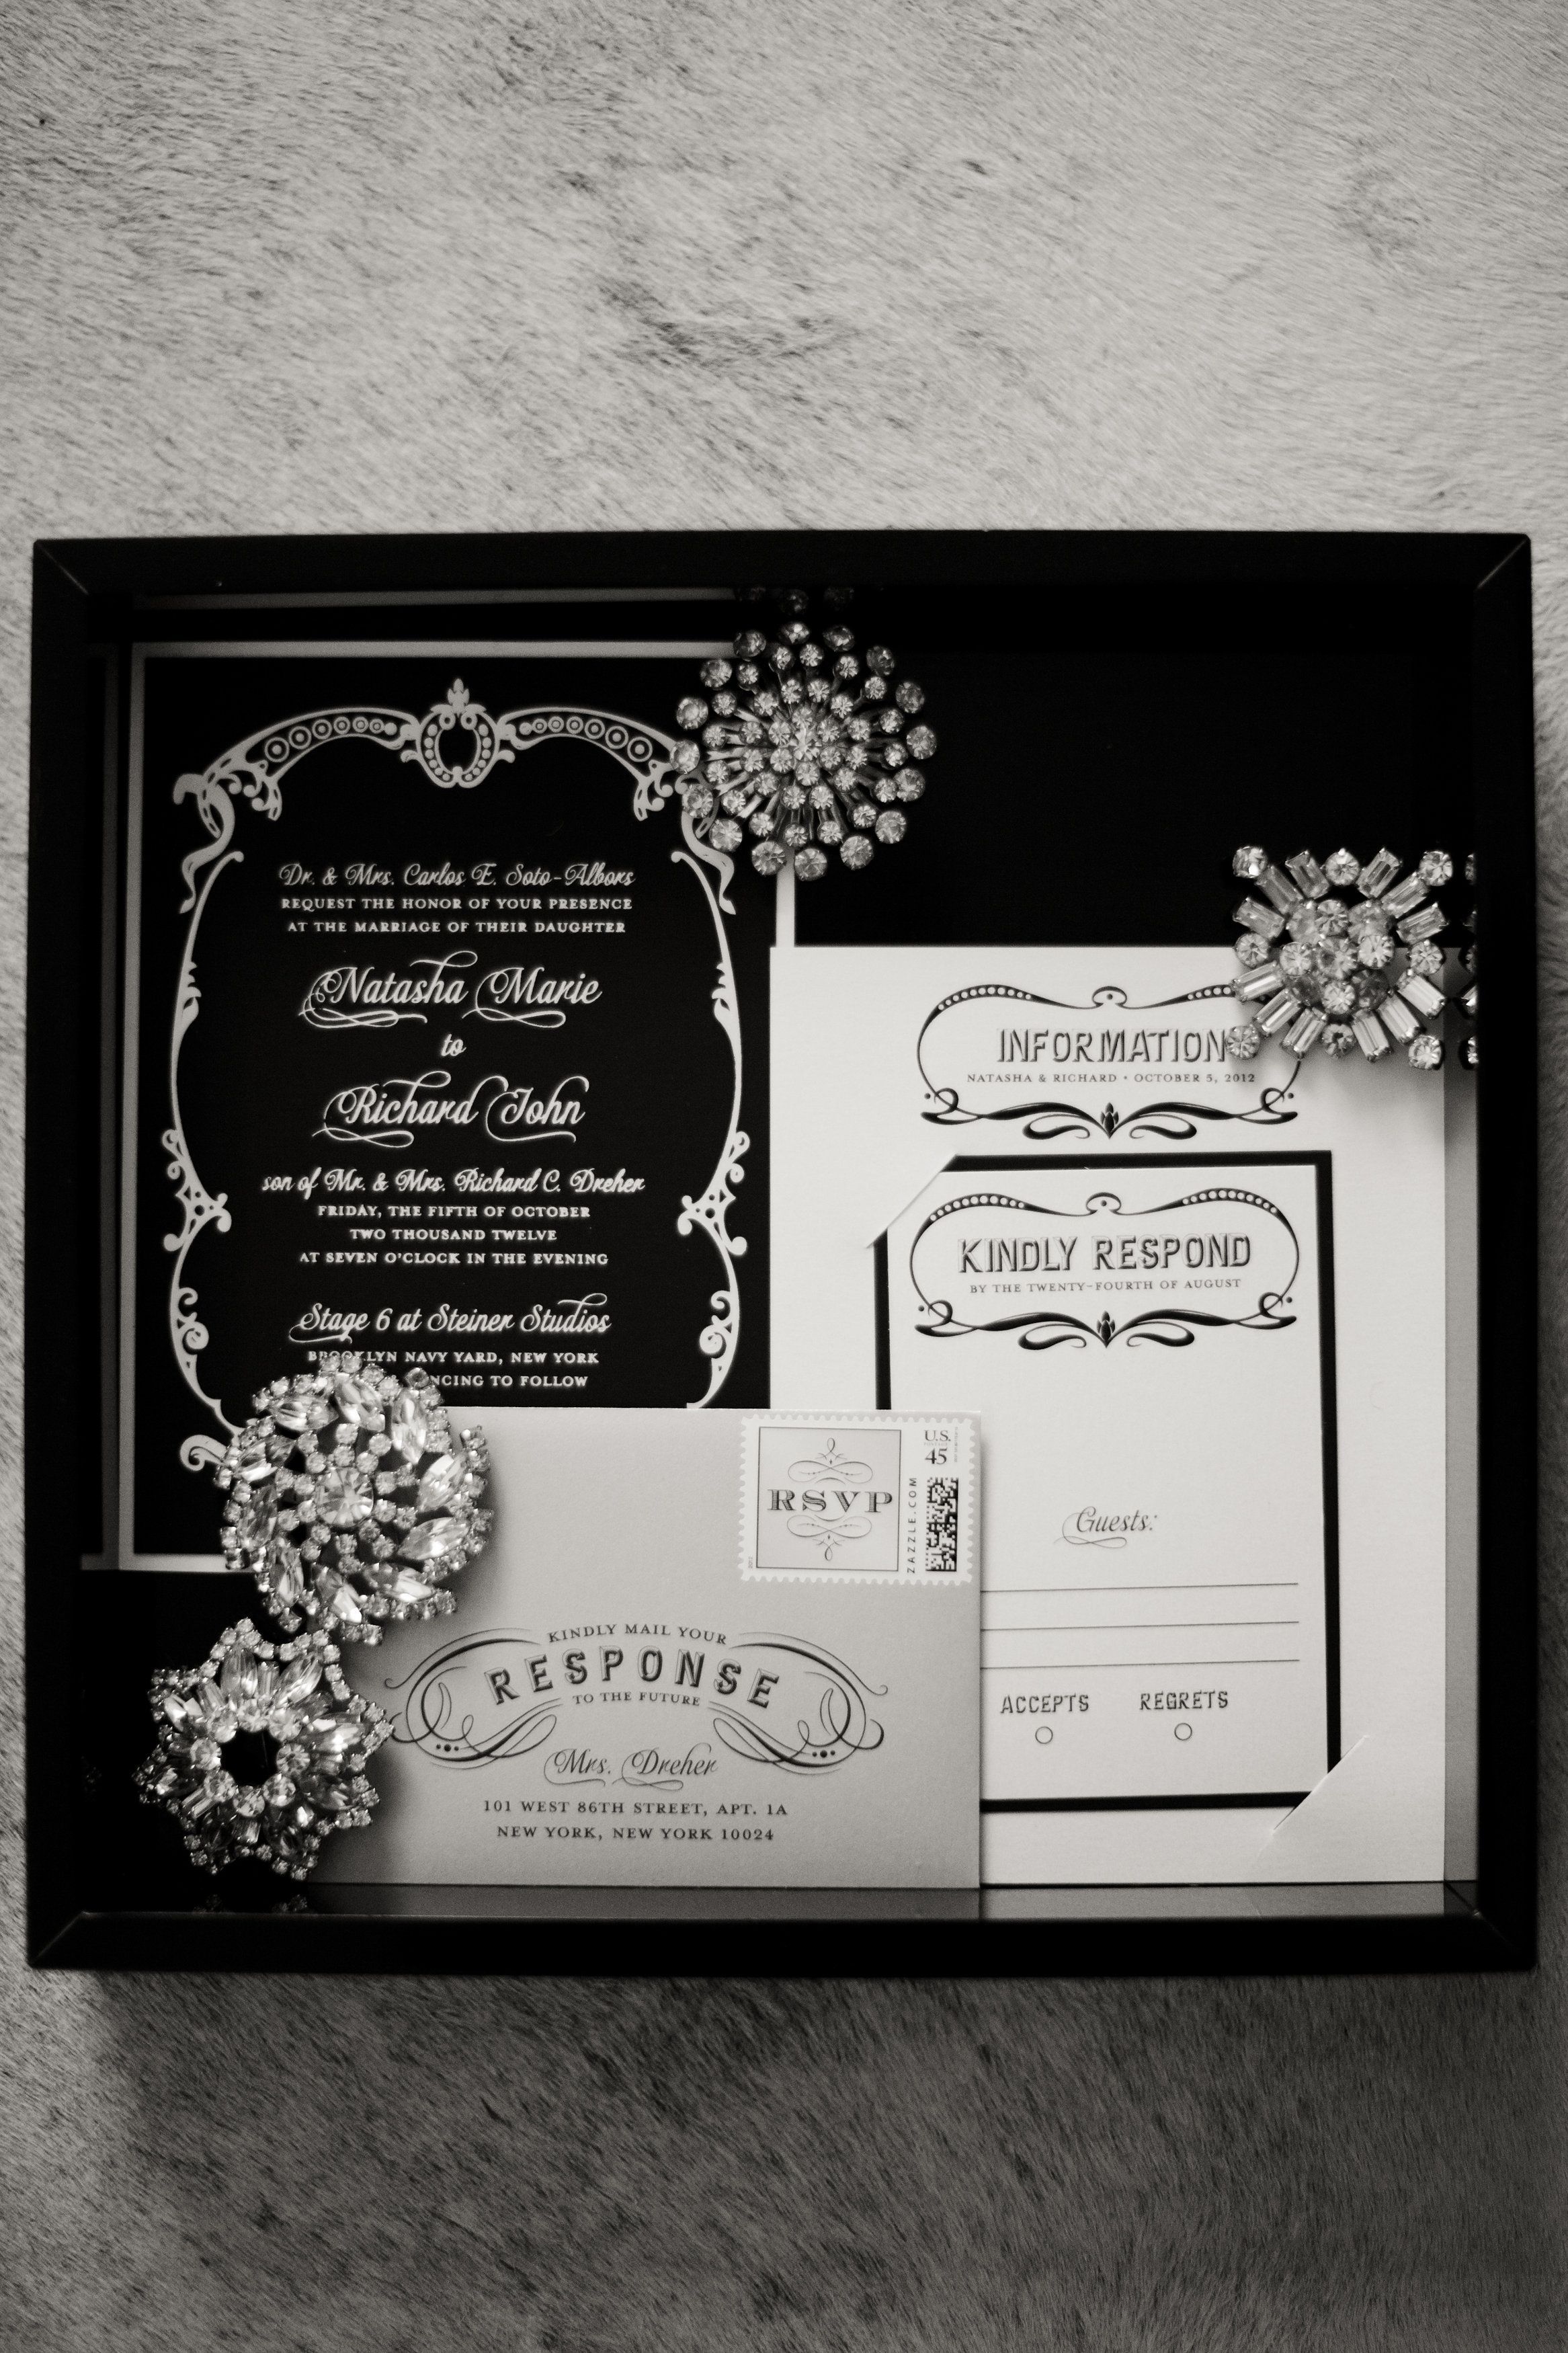 Glamorous #vintage style wedding invitations for a Great Gatsby theme.